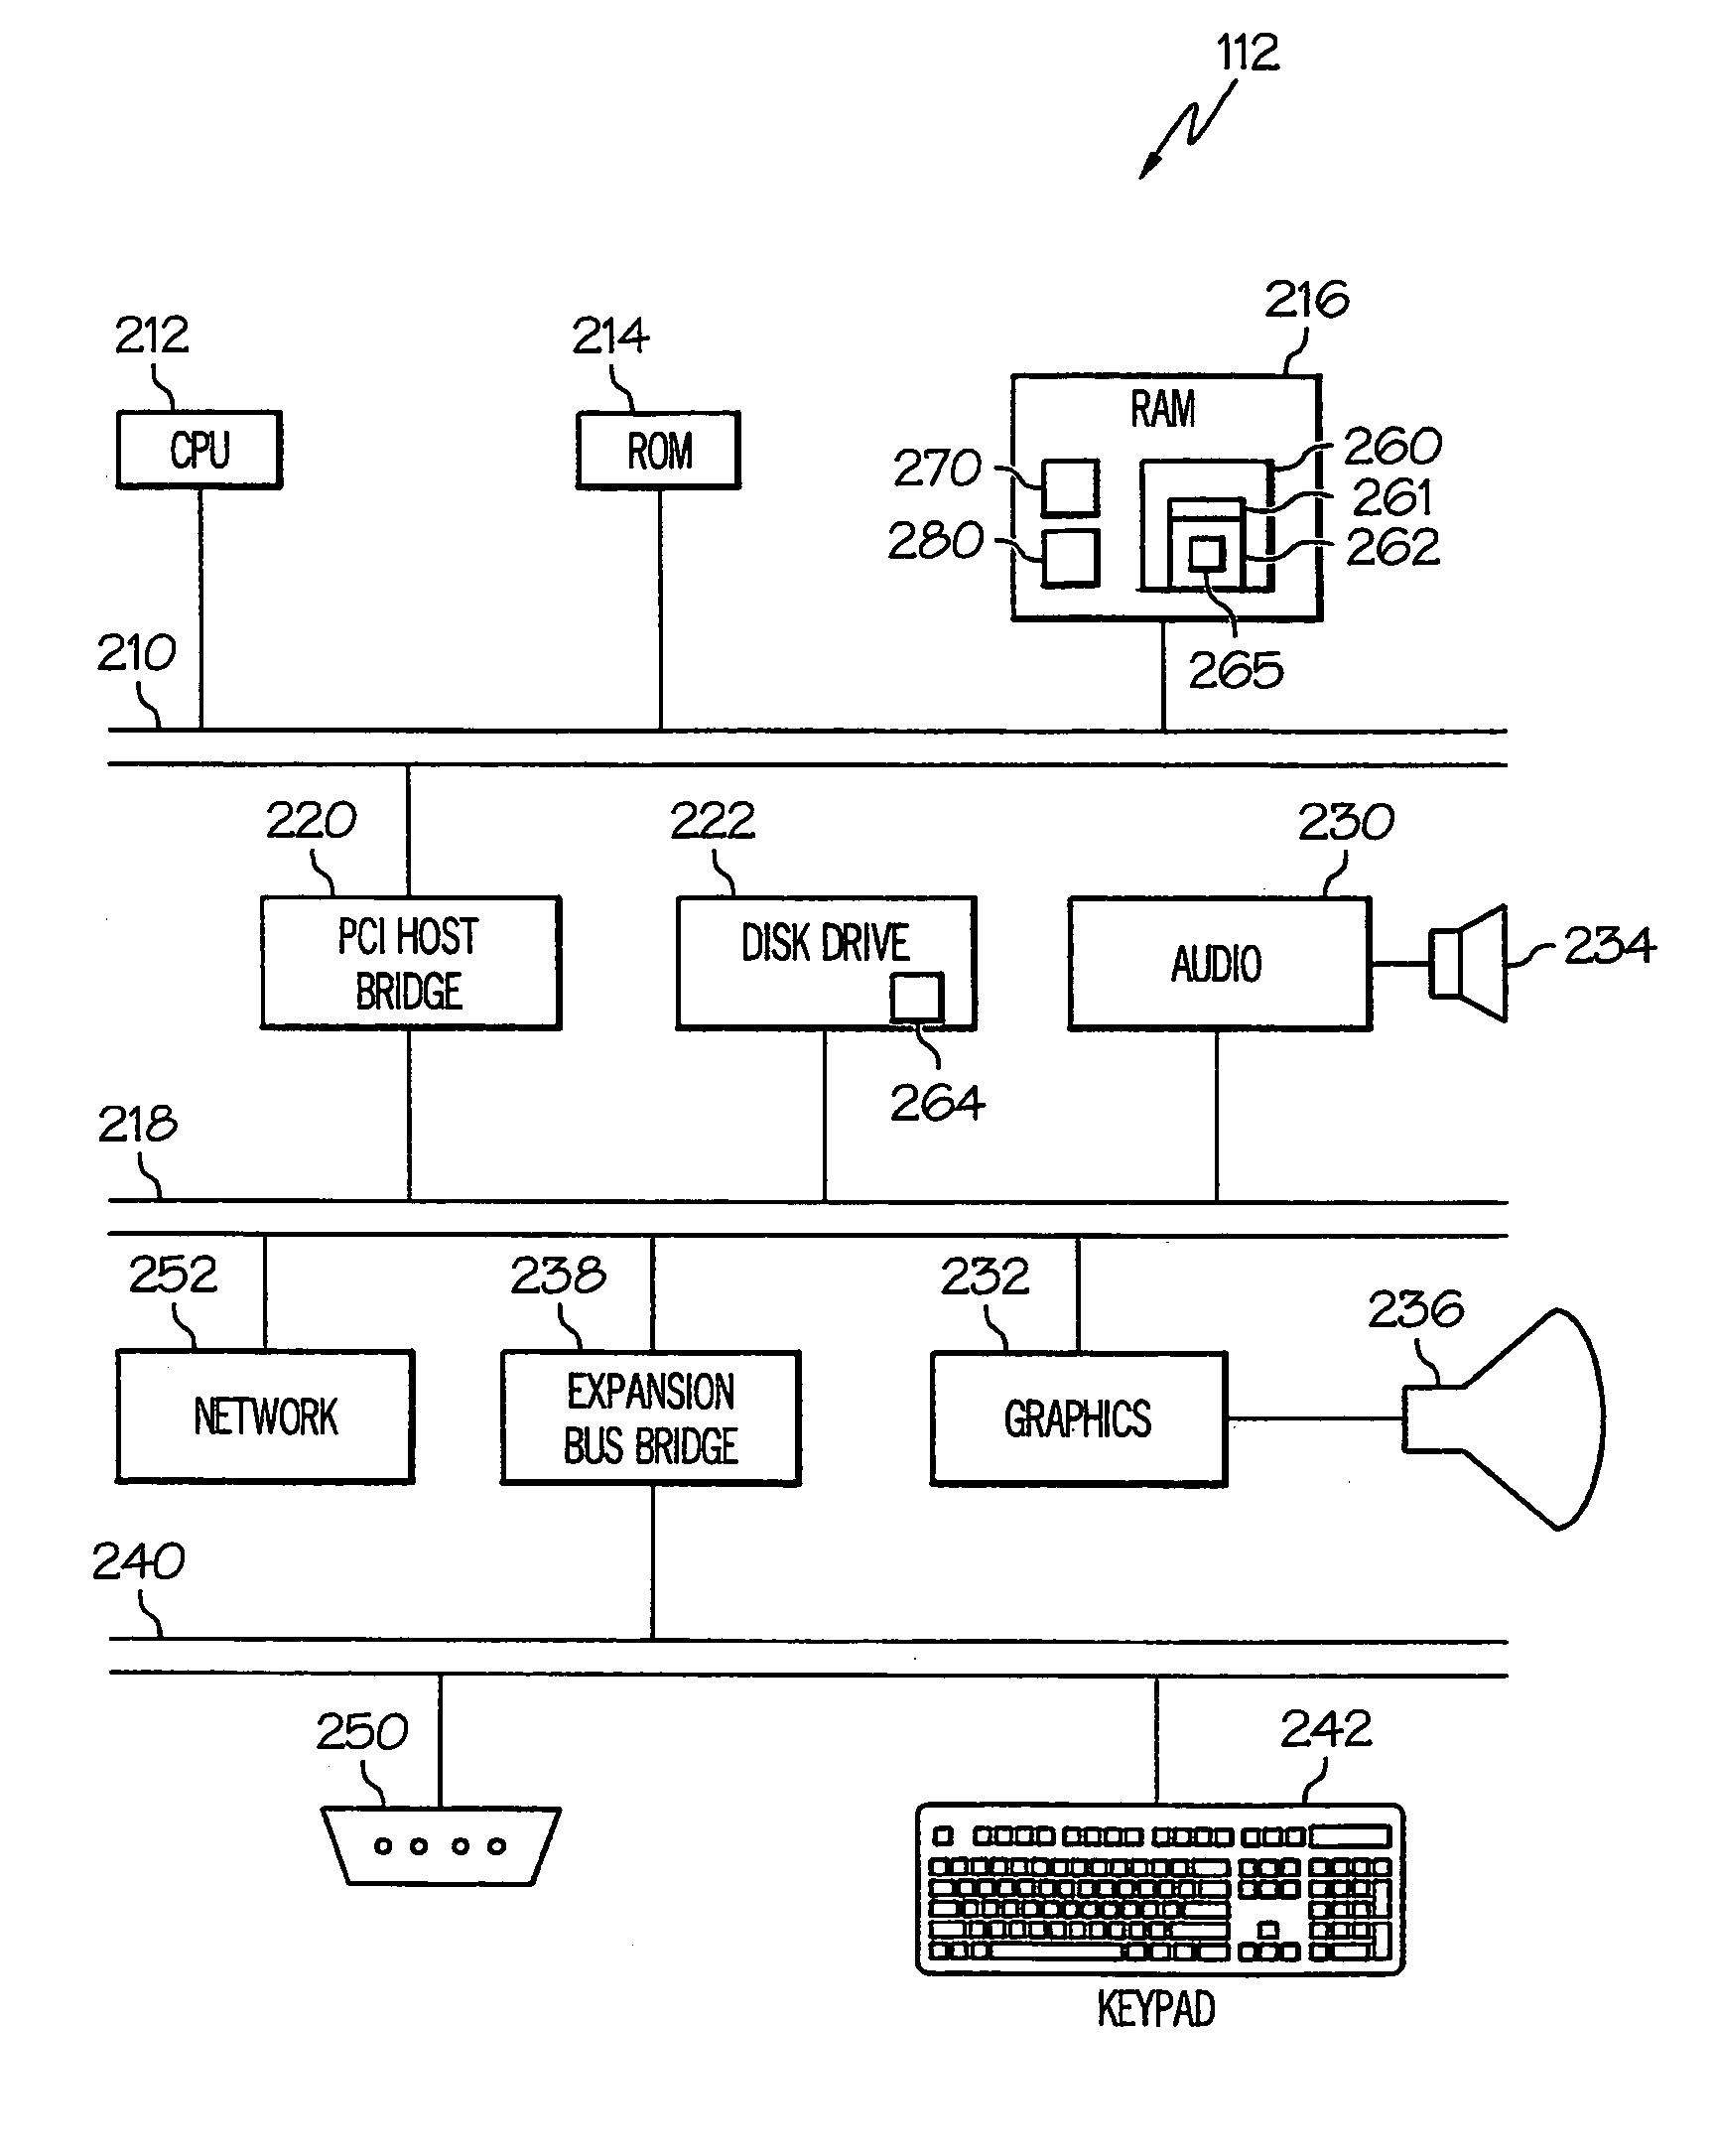 Method and system for triggering enhanced security verification in response to atypical selections at a service-oriented user interface terminal